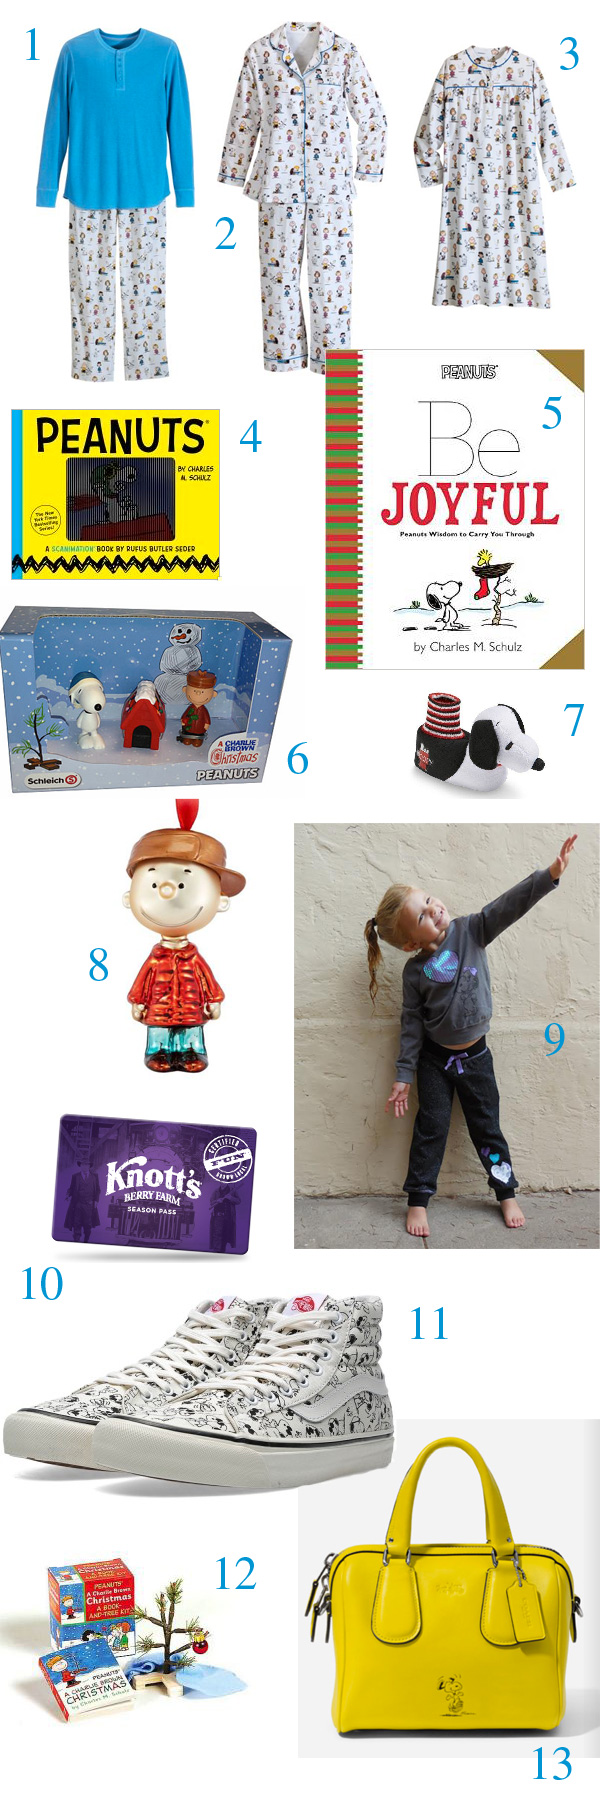 Snoopy Presents, Holiday Guide 2014, Peanuts Gang gifts, snoopy gifts, charlie brown gifts